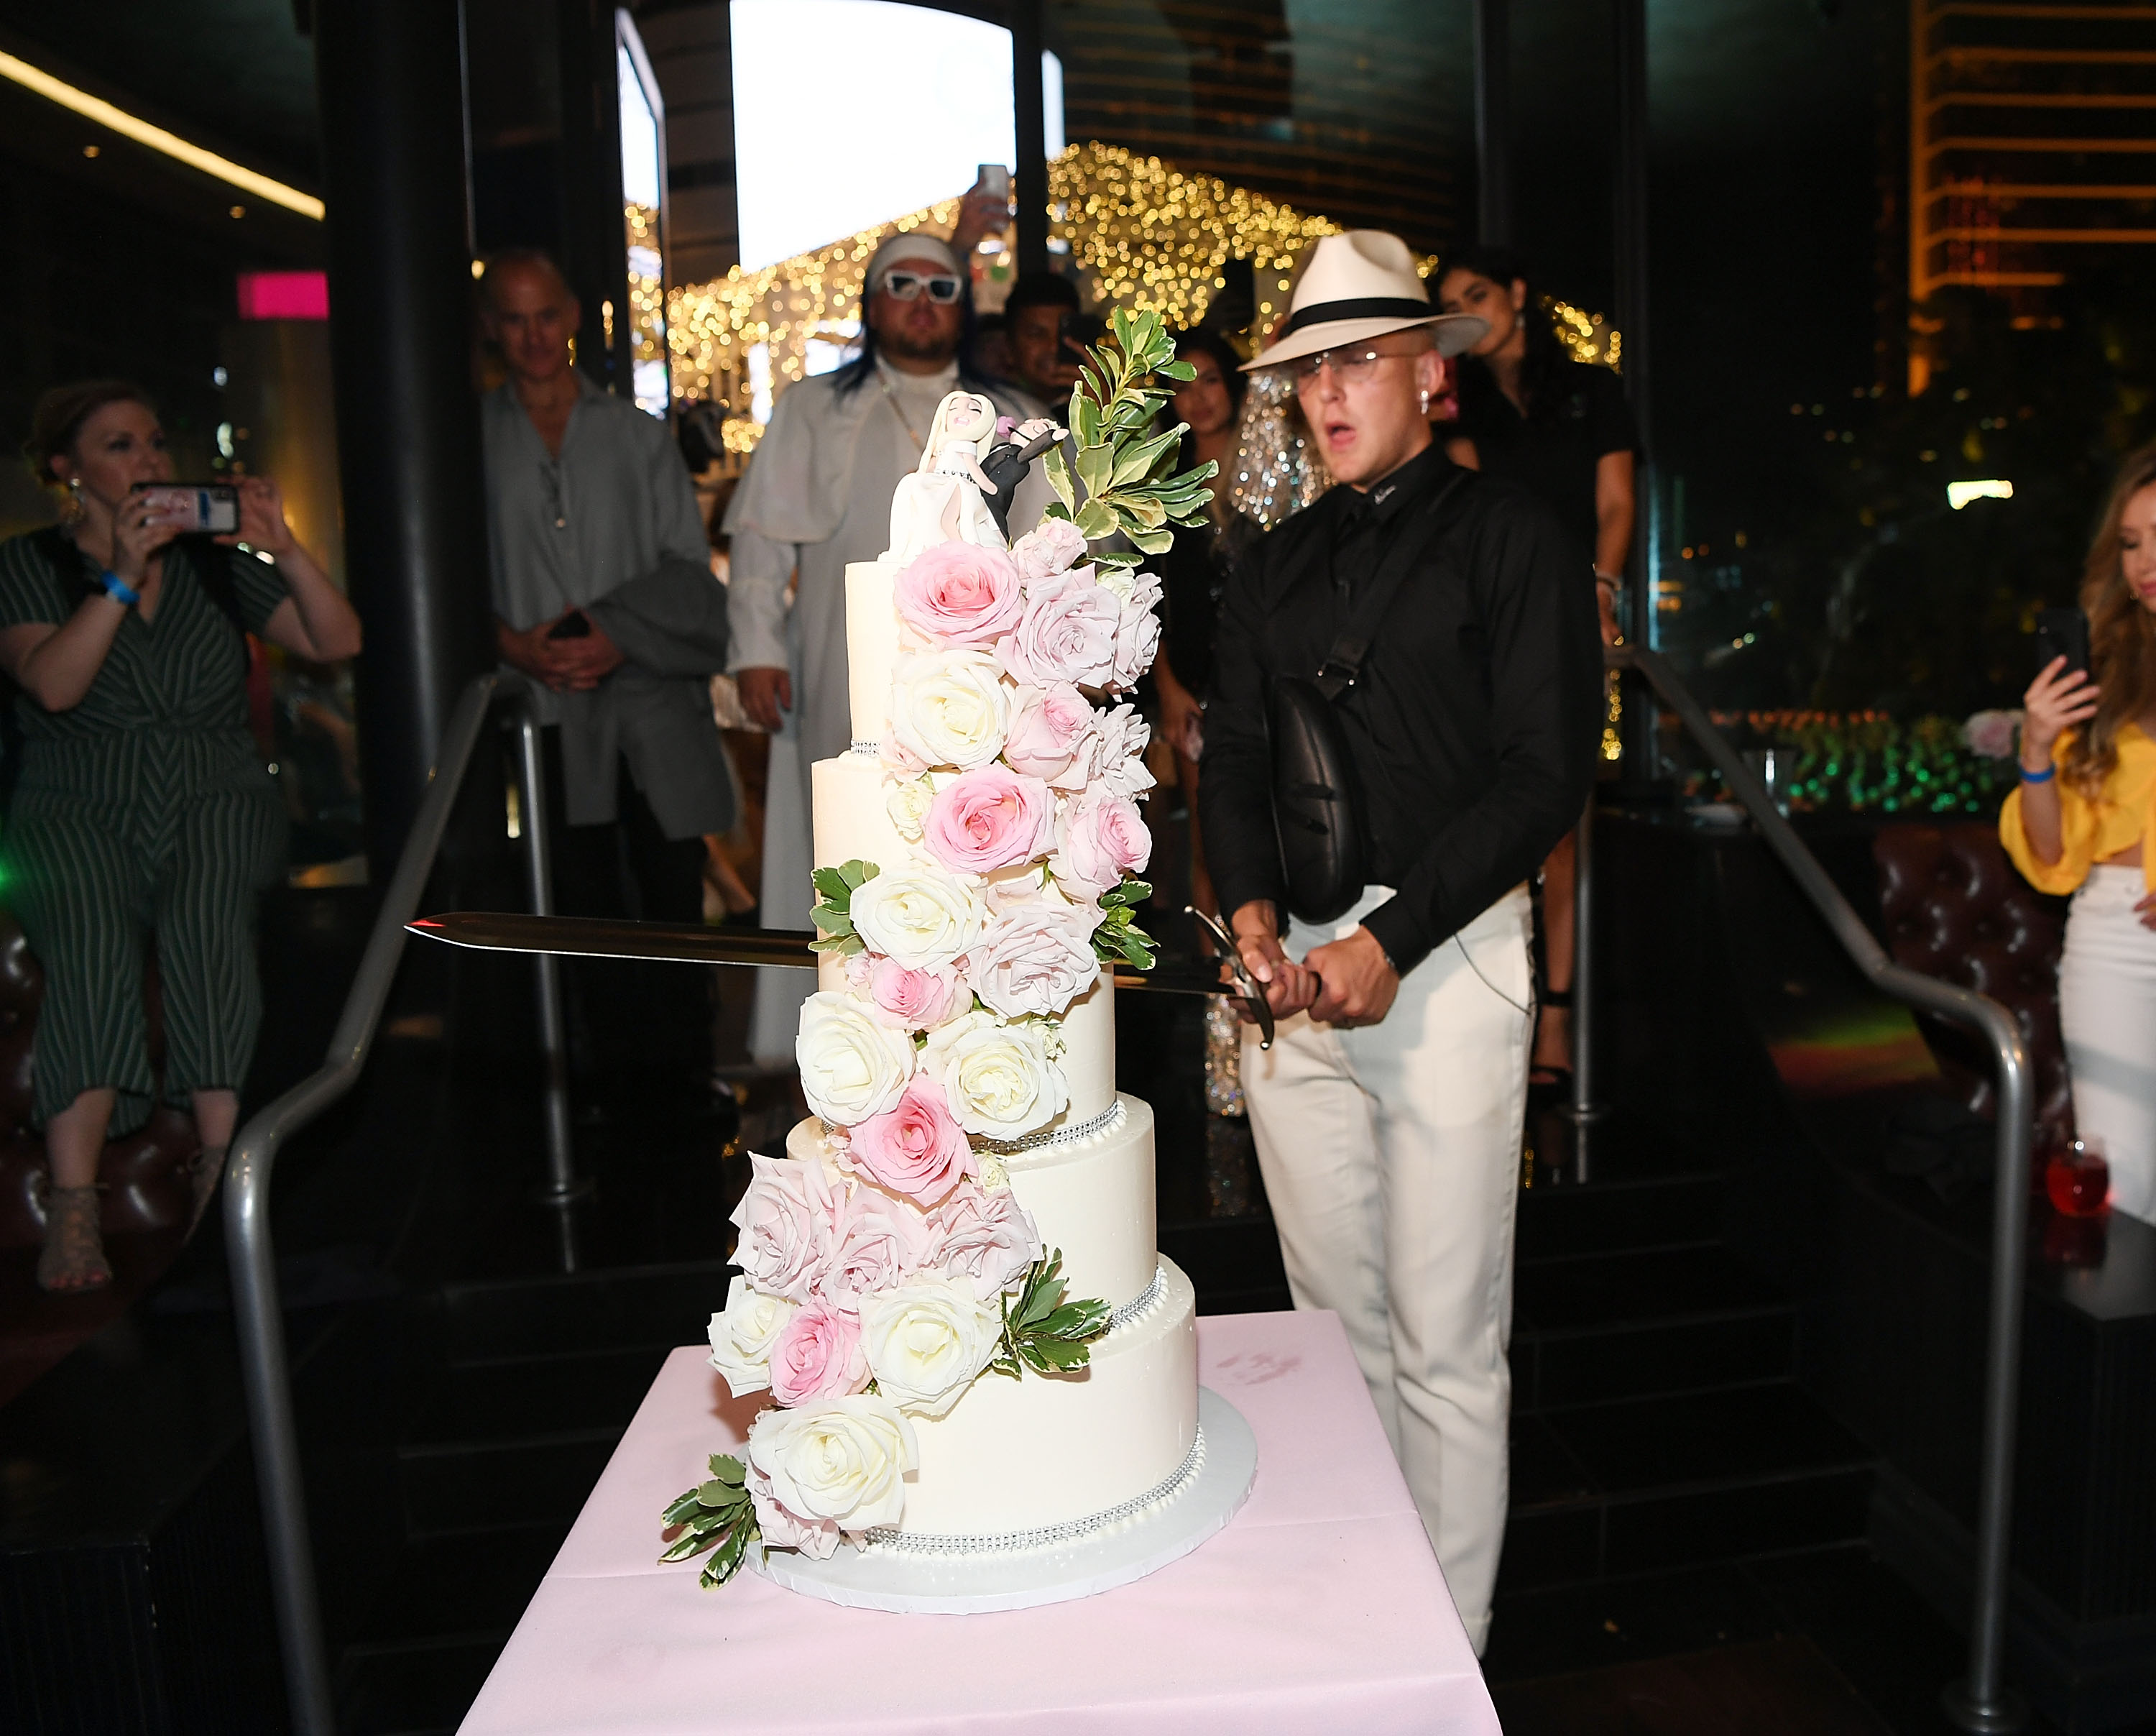 Jake Paul cuts the cake at his wedding reception at Sweet Beginnings in Sugar Factory on July 28, 2019 in Las Vegas, Nevada. (Photo by Denise Truscello/Getty Images for Sugar Factory) (Denise Truscello&mdash;Getty Images for Sugar Factory)